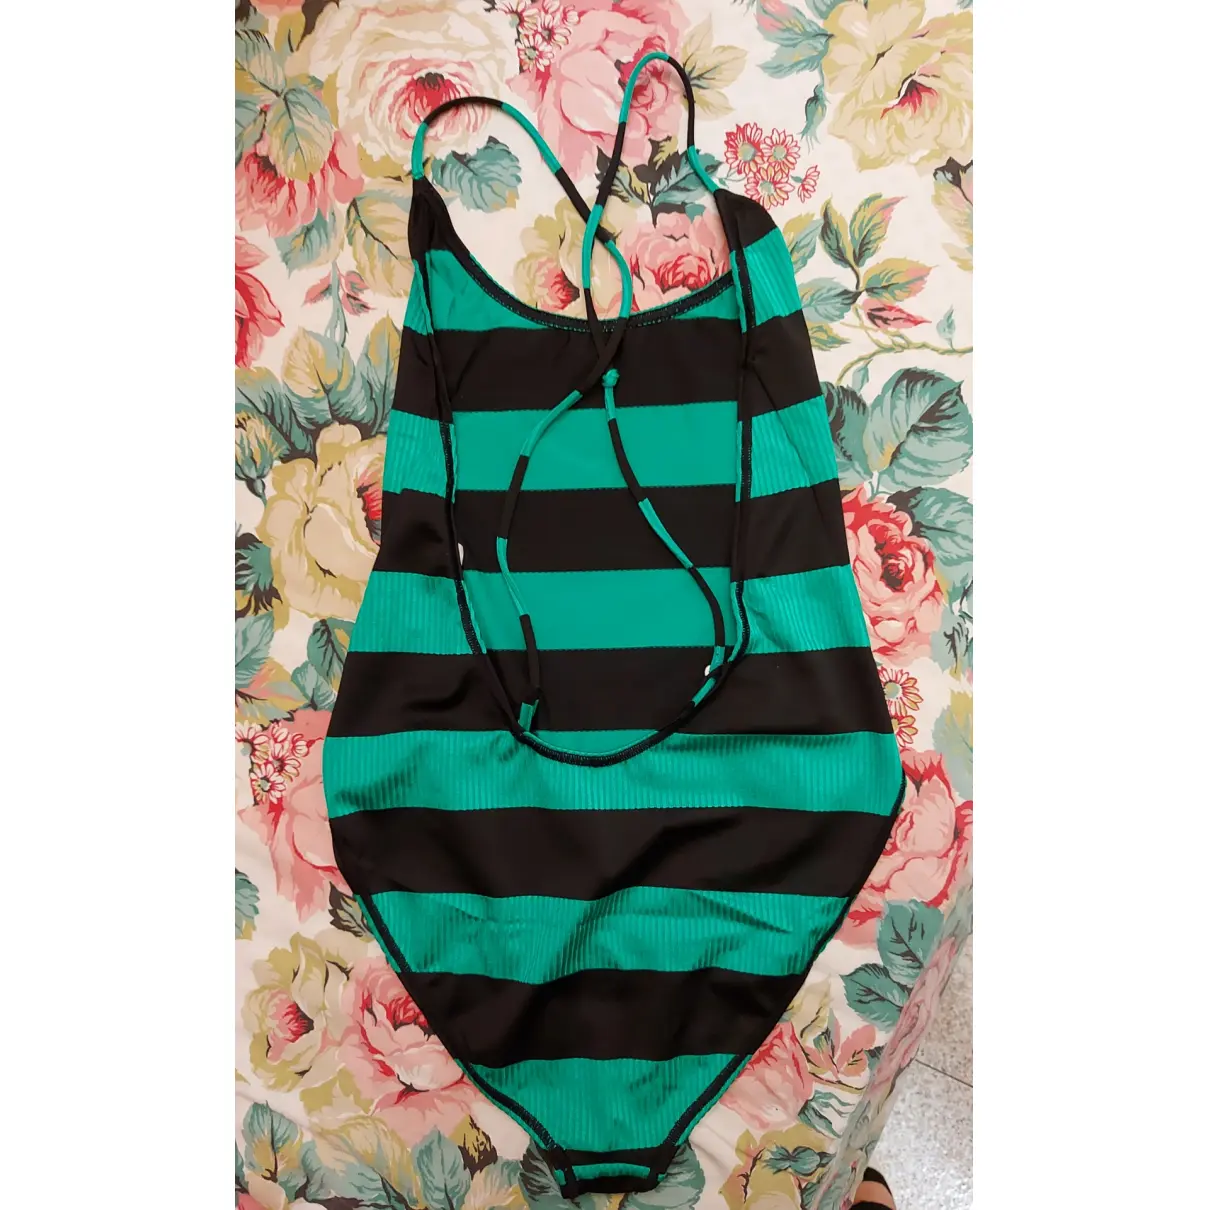 Buy Basile One-piece swimsuit online